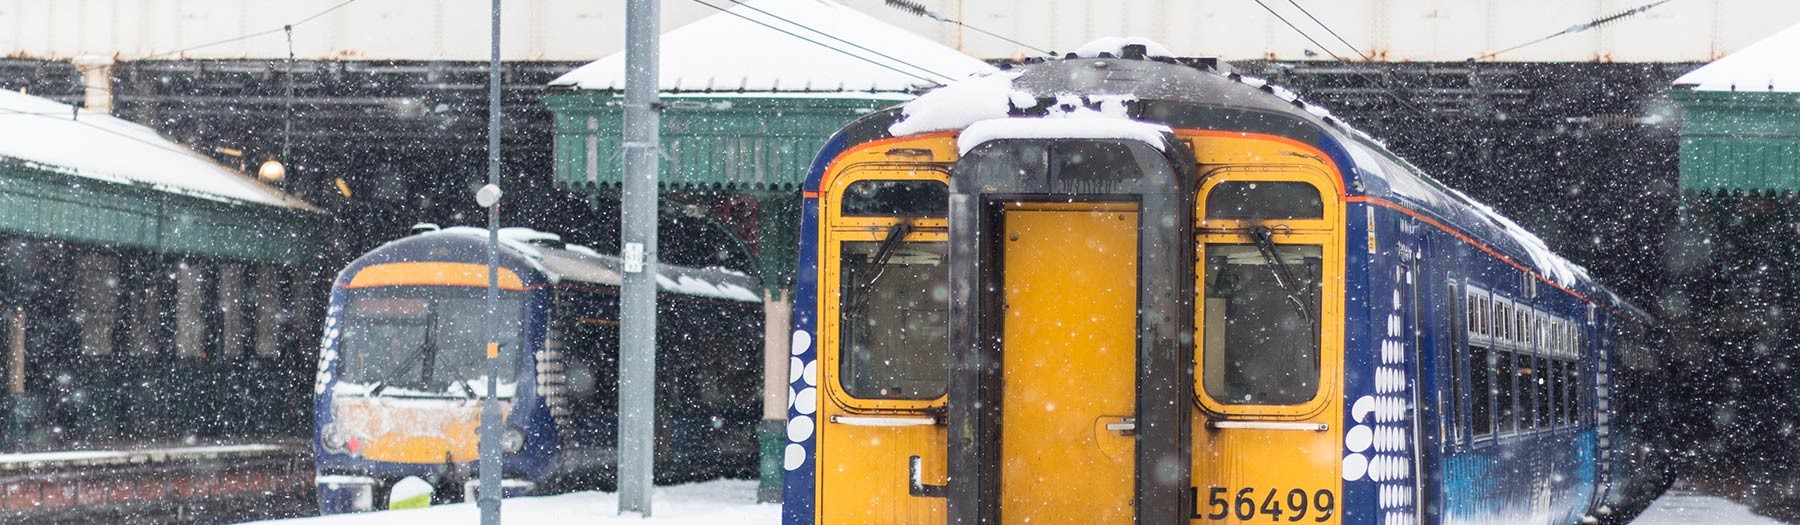 Snow on trains at a station